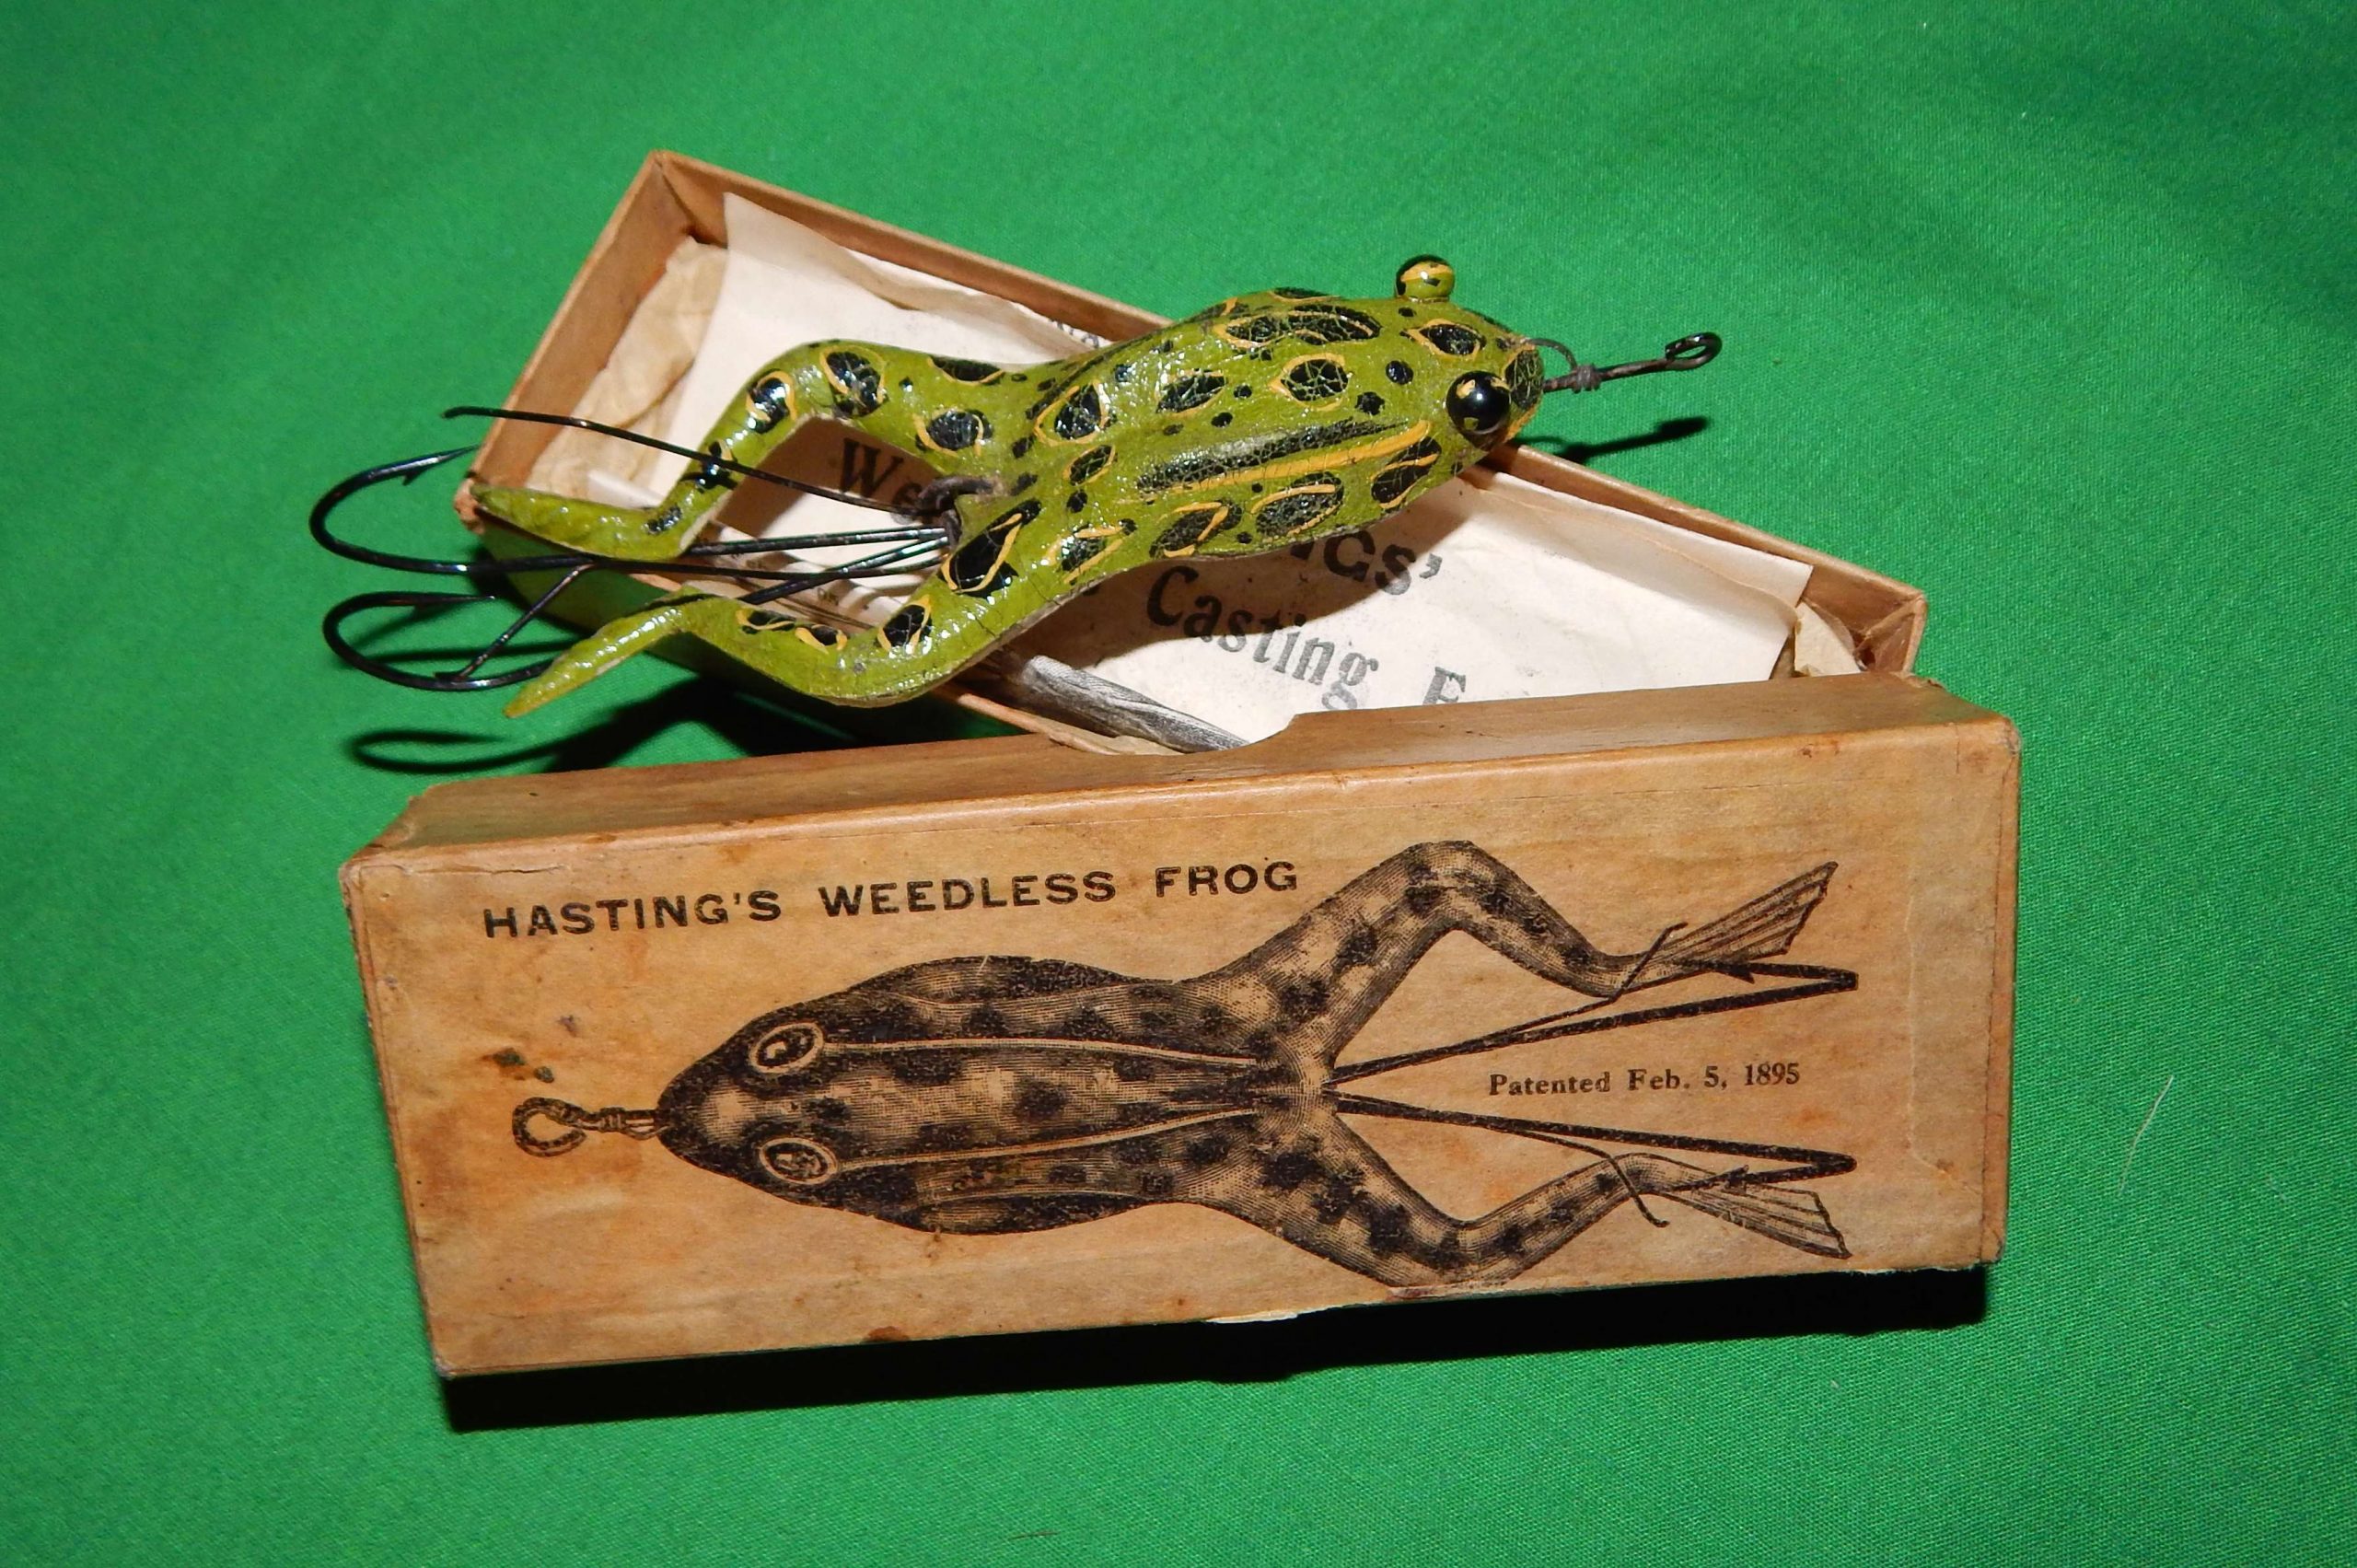 <h4>Plastic Frog</h4><BR>
Bassmaster Elite Series pro Bernie Schultz would scold me for even suggesting that the plastic frog was invented during the past 50 years. As a great historian of the sport and a collector of vintage fishing tackle, Bernie would point out that the Hastingâs Weedless Casting Frog was actually marketed in 1895. But letâs be honest, frogs have really come into their own during the past half century â and theyâve had a major effect on pro fishing.